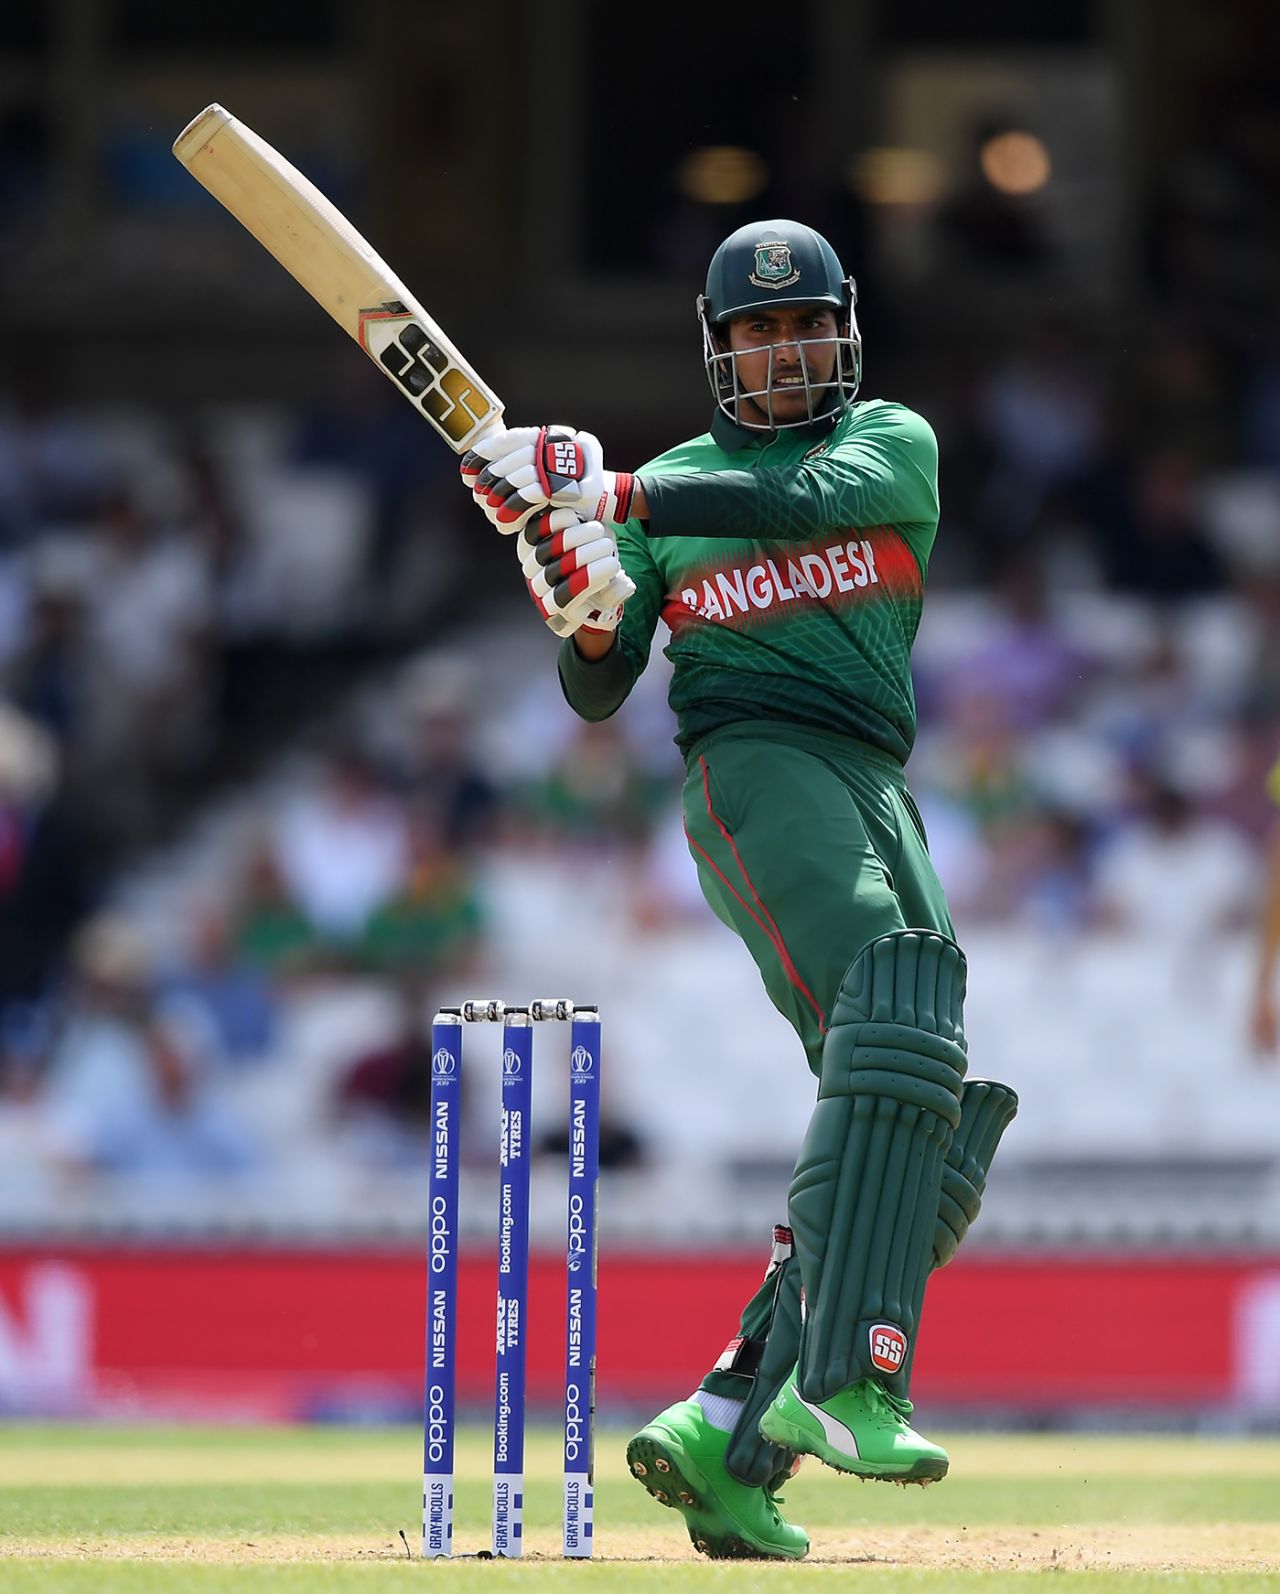 The pull is one of Soumya Sarkar's most productive shots, Bangladesh v South Africa, World Cup 2019, The Oval, June 2, 2019